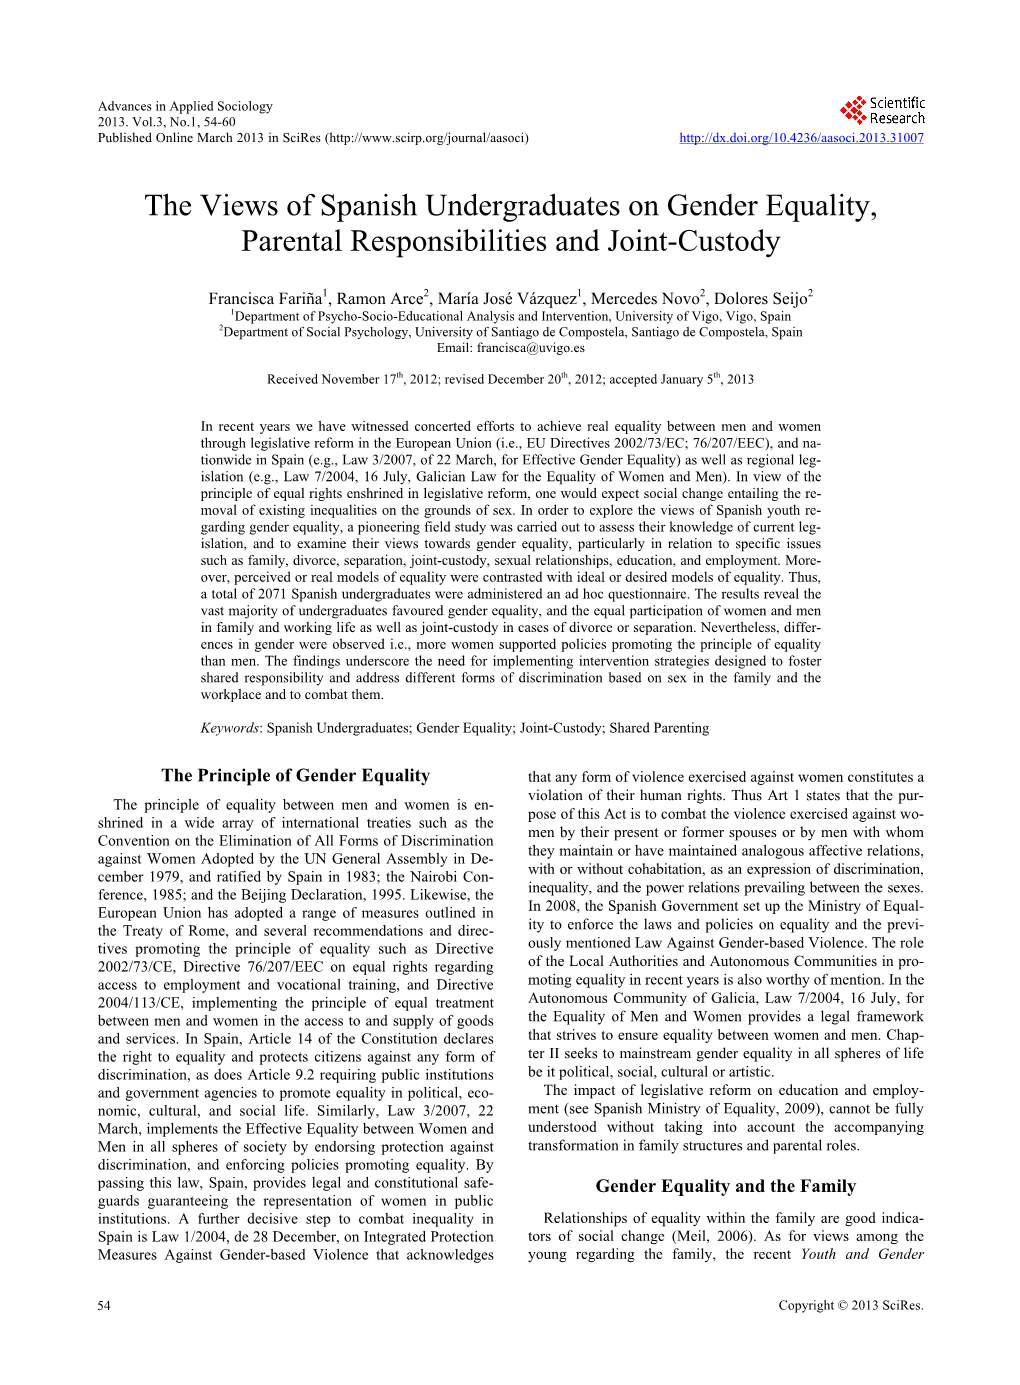 The Views of Spanish Undergraduates on Gender Equality, Parental Responsibilities and Joint-Custody